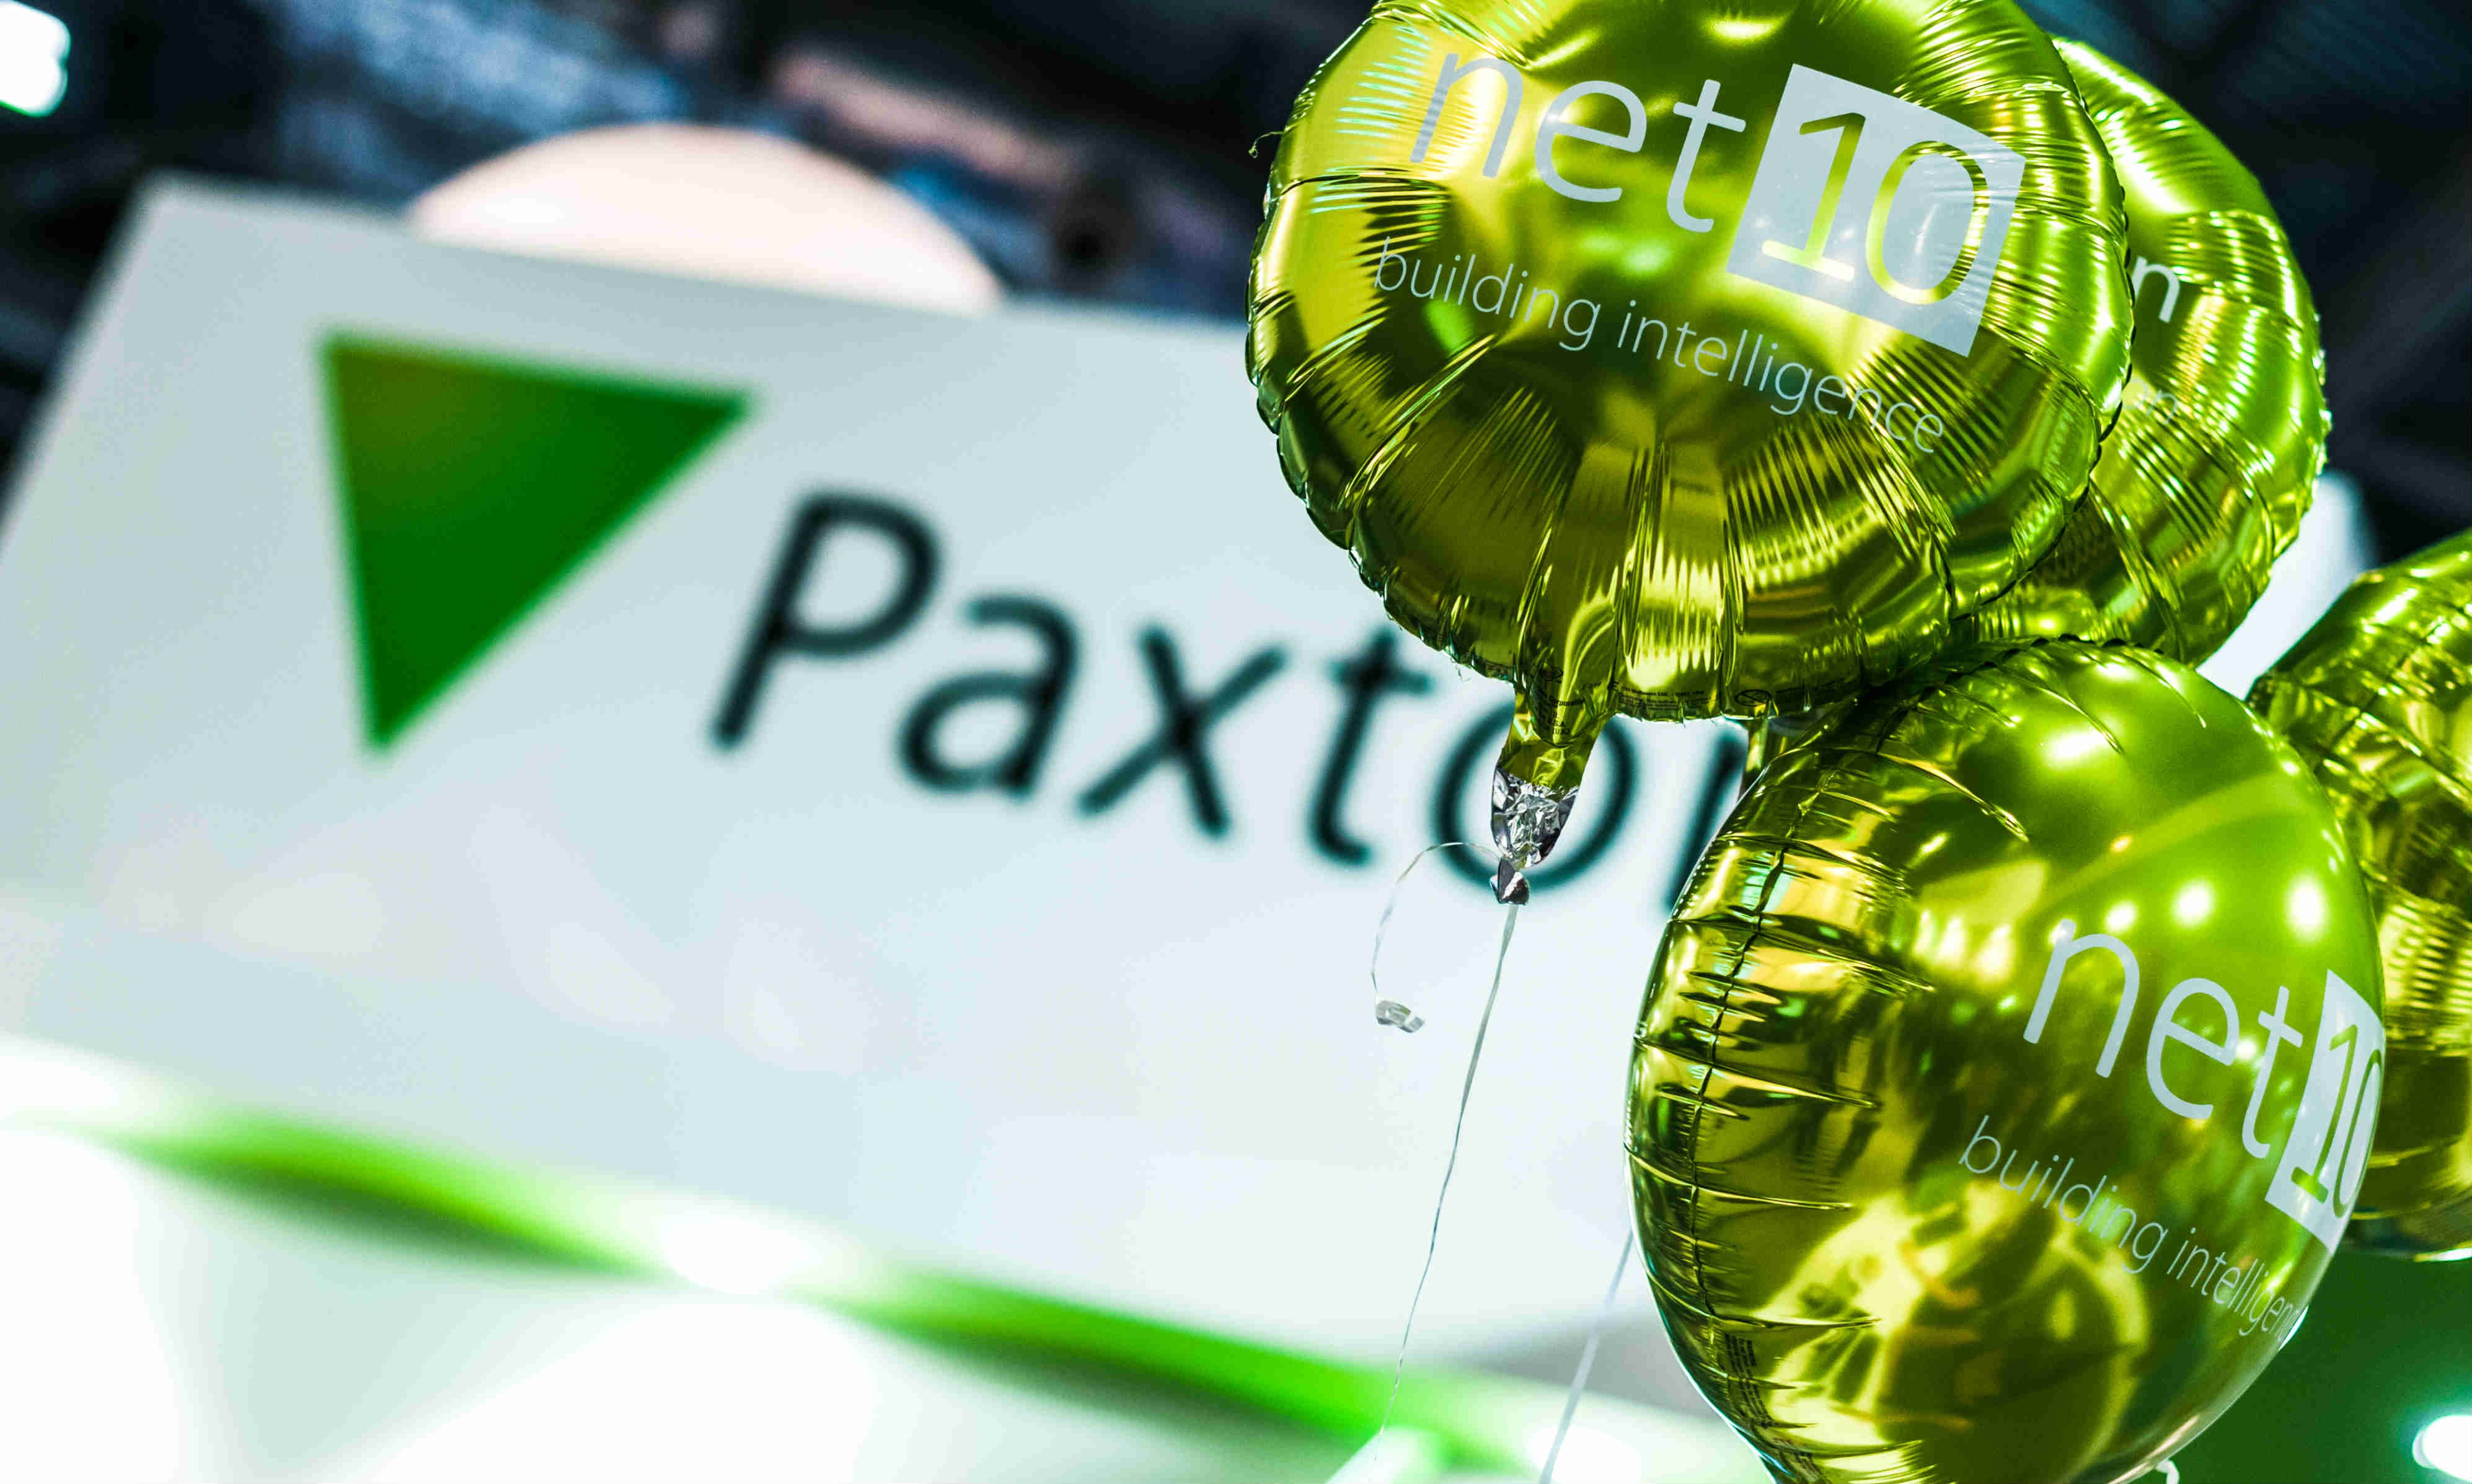 Paxton preview Net10 at IFSEC